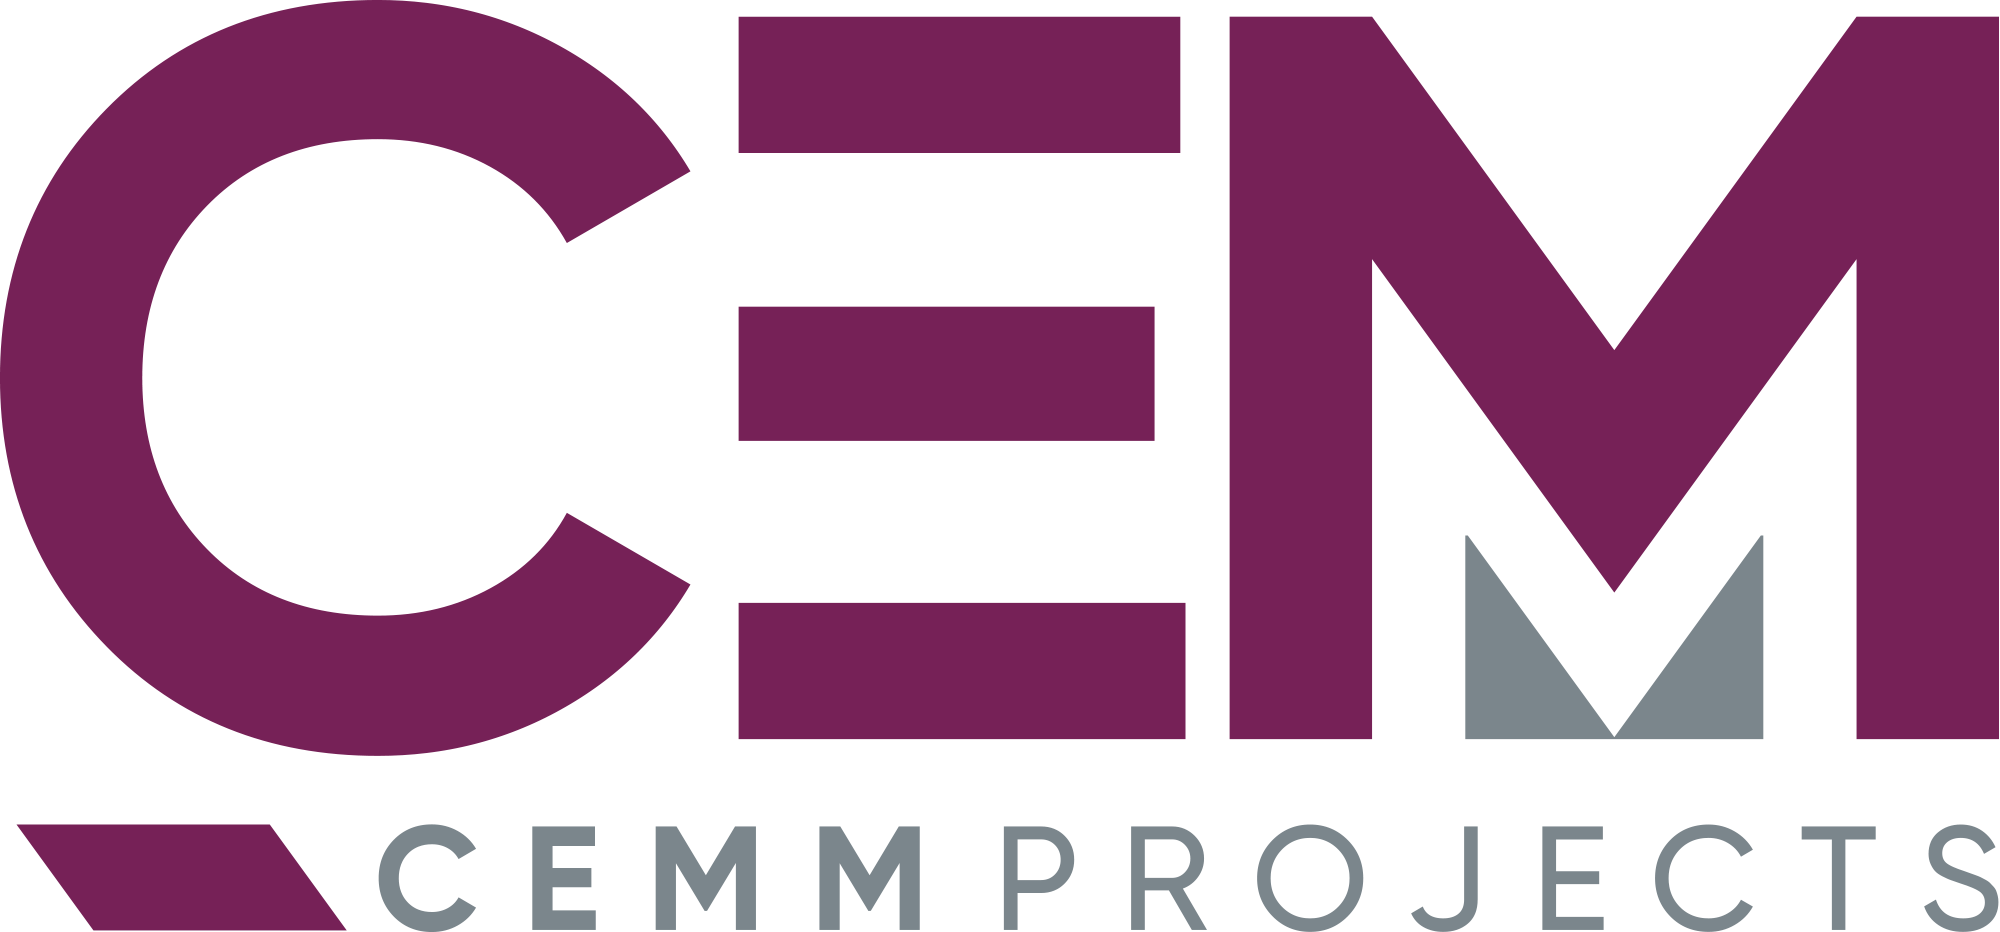 CEMM Projects logo